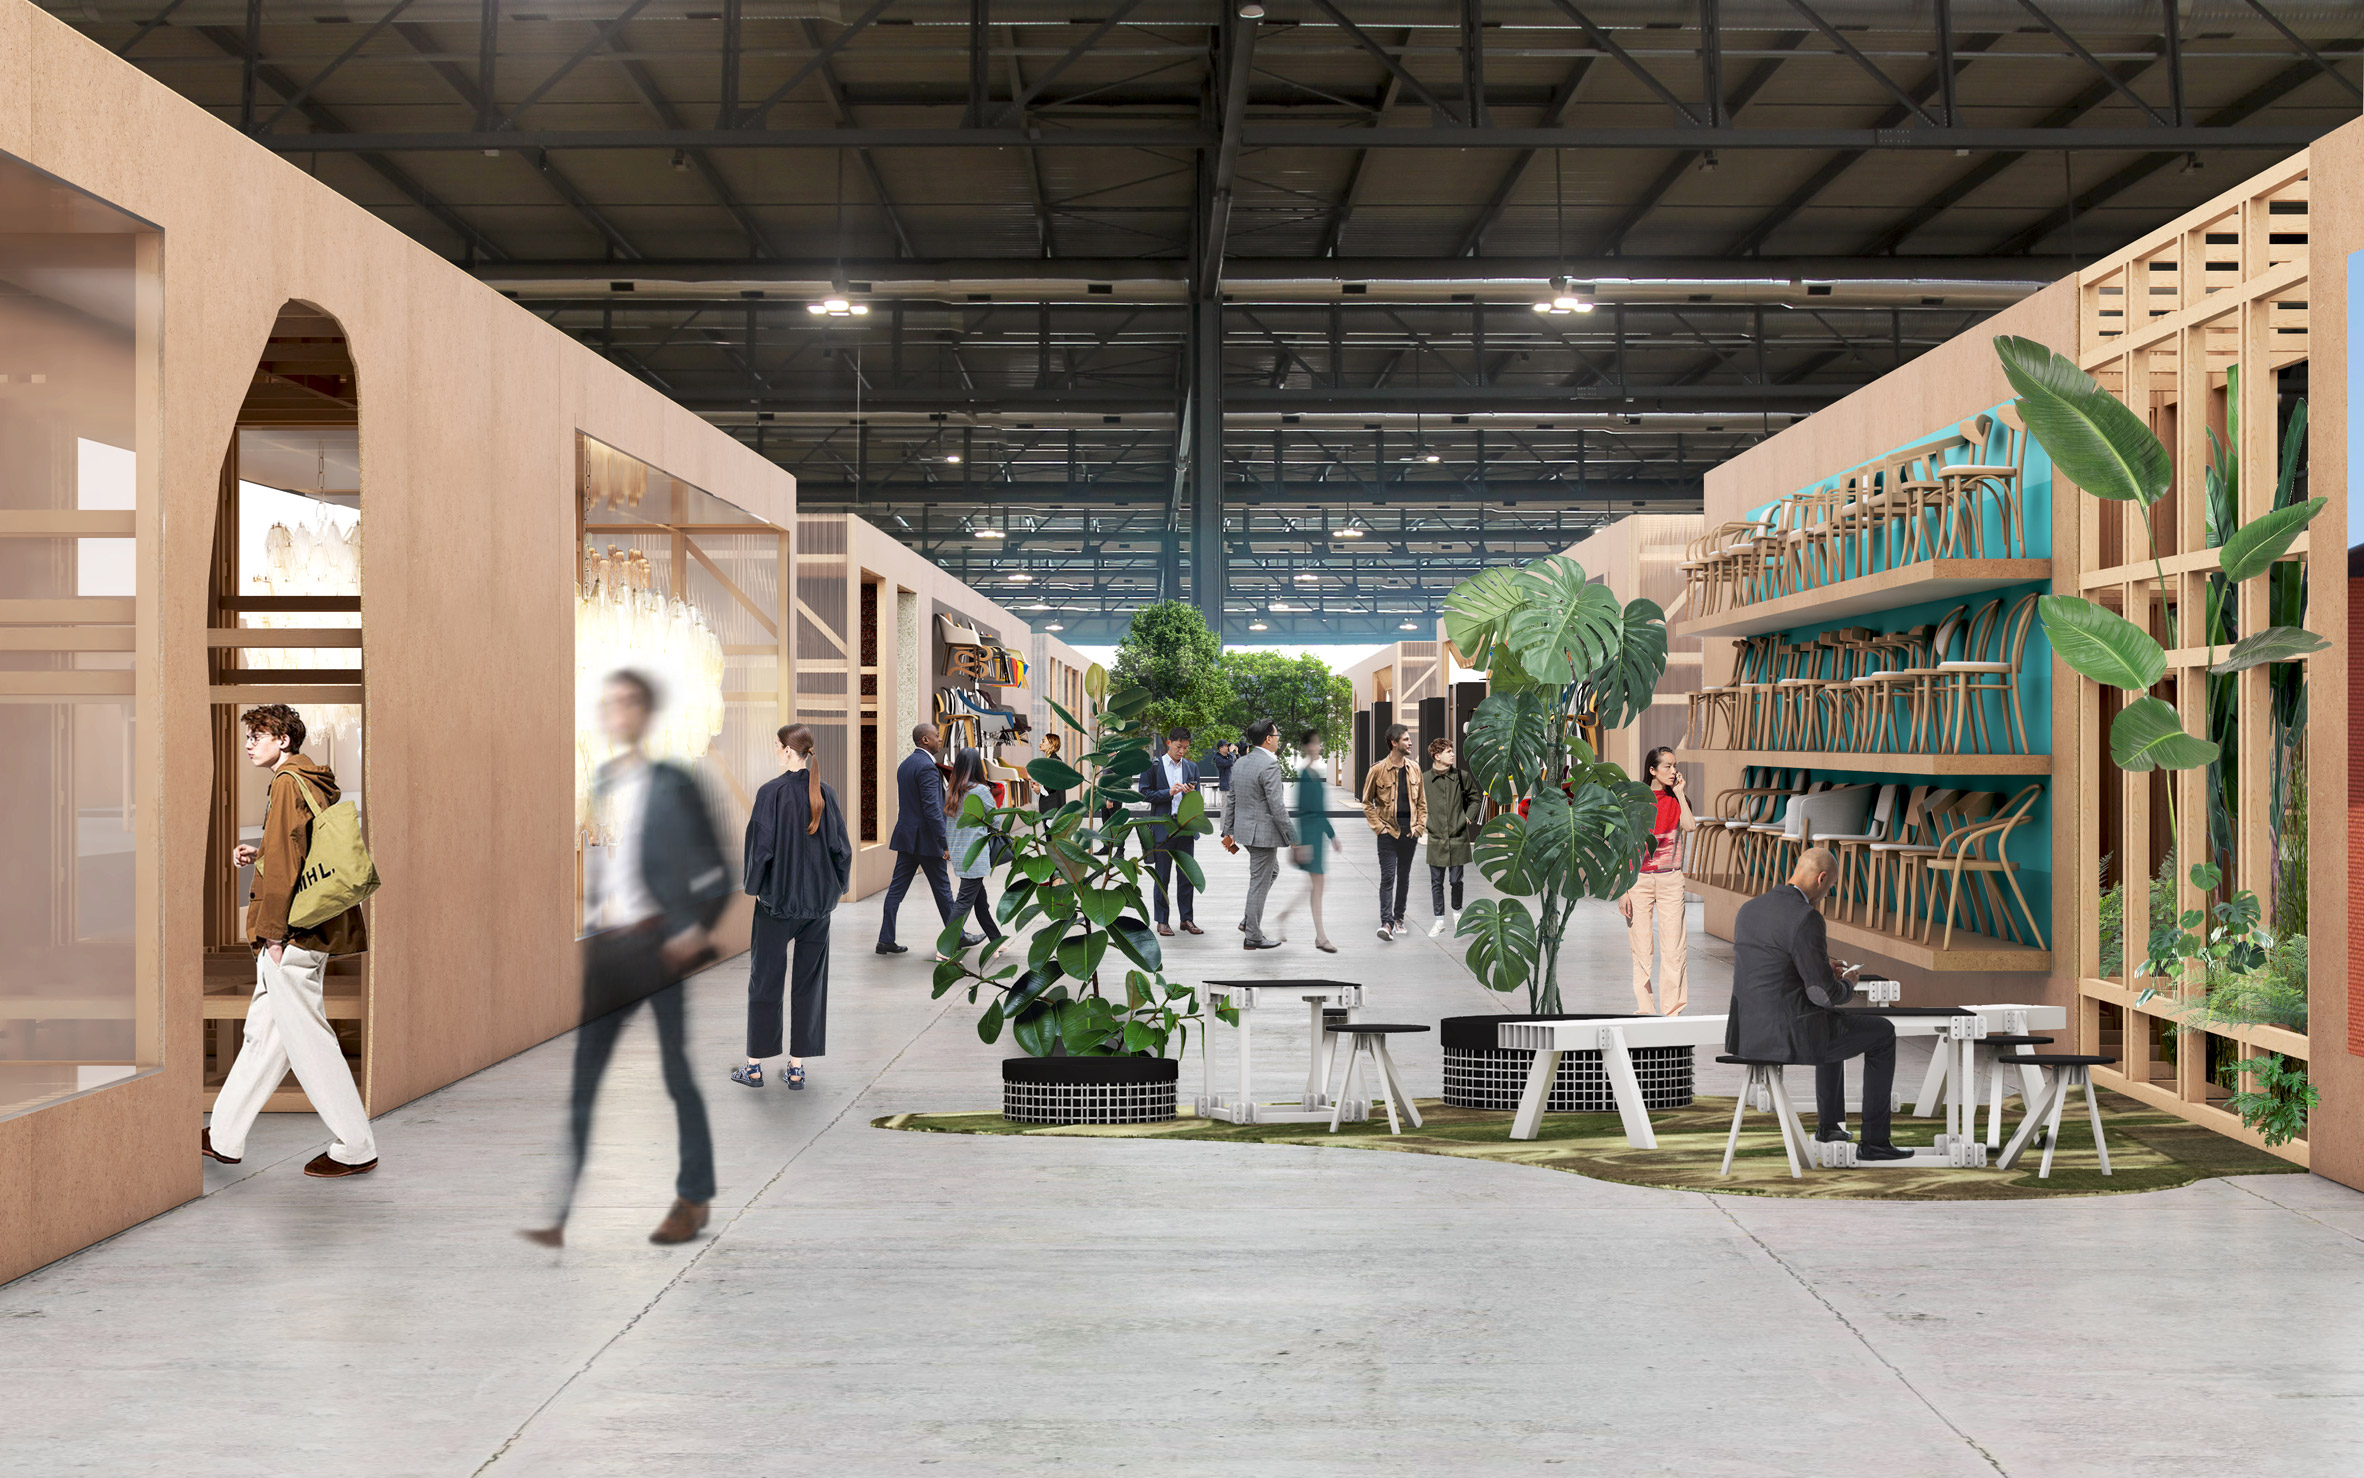 Renders of products displayed on walls at Salone del Mobile 2021